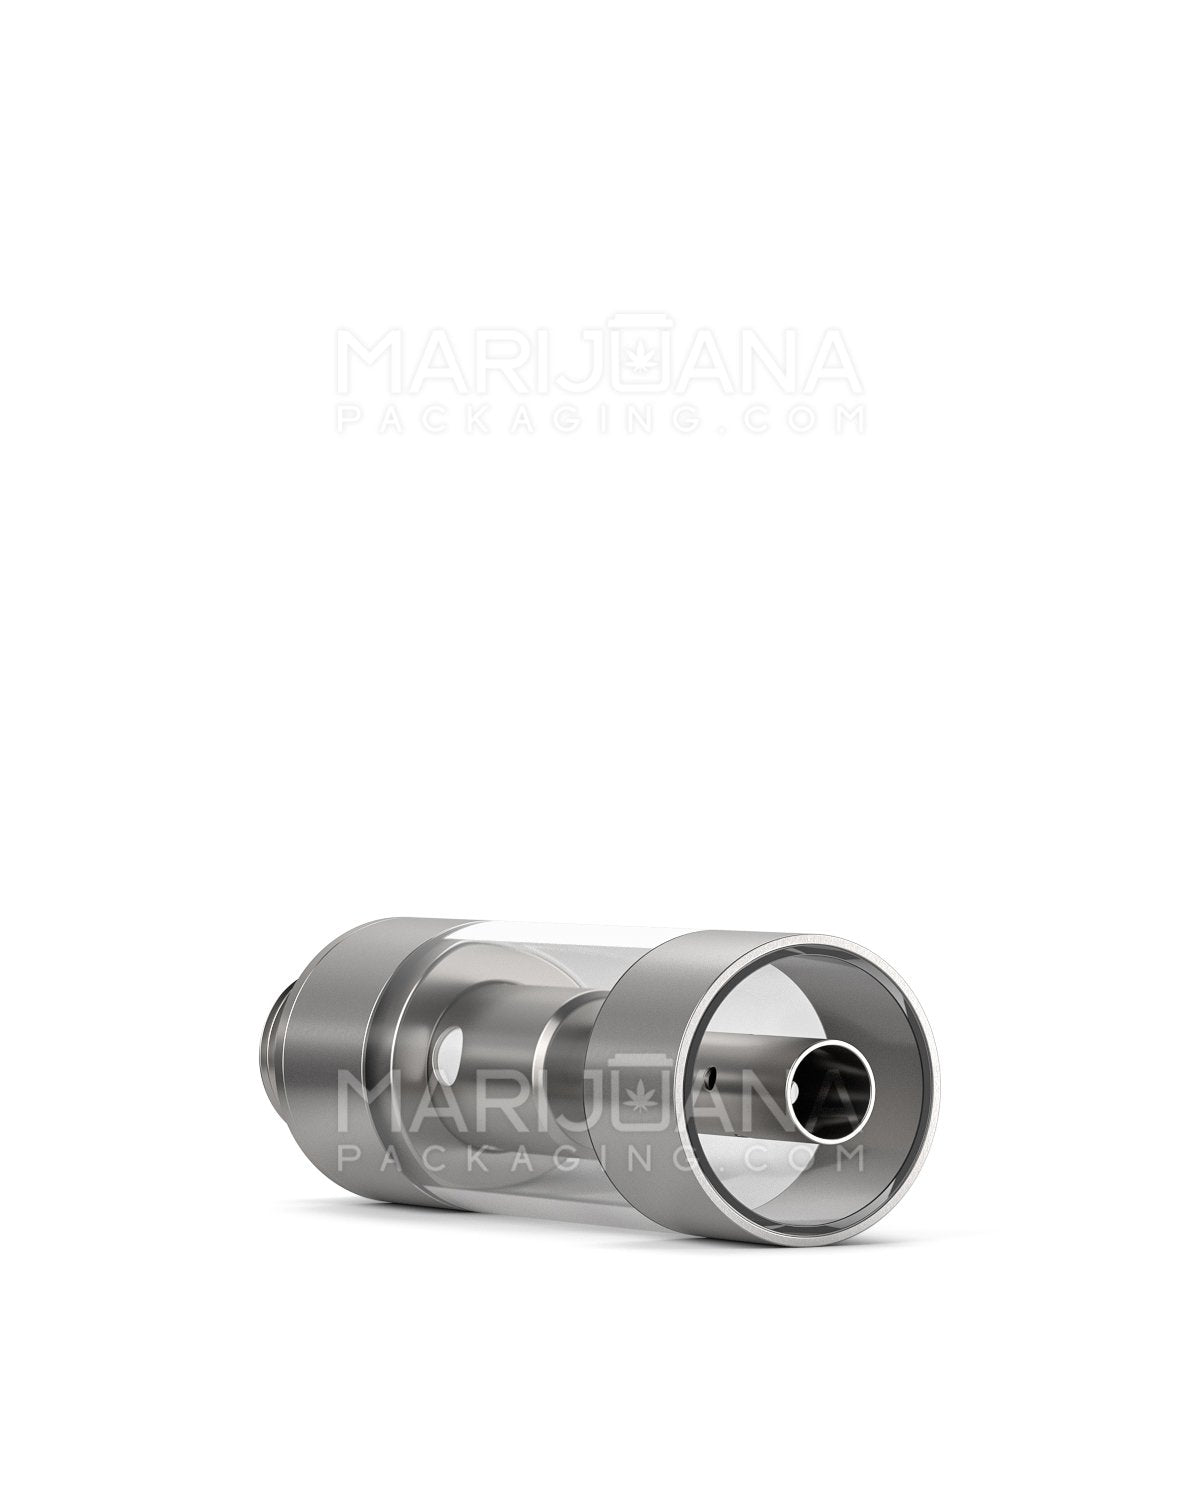 AVD | GoodCarts Plastic Vape Cartridge with 2mm Aperture | 0.5mL - Press On - 1200 Count - 4